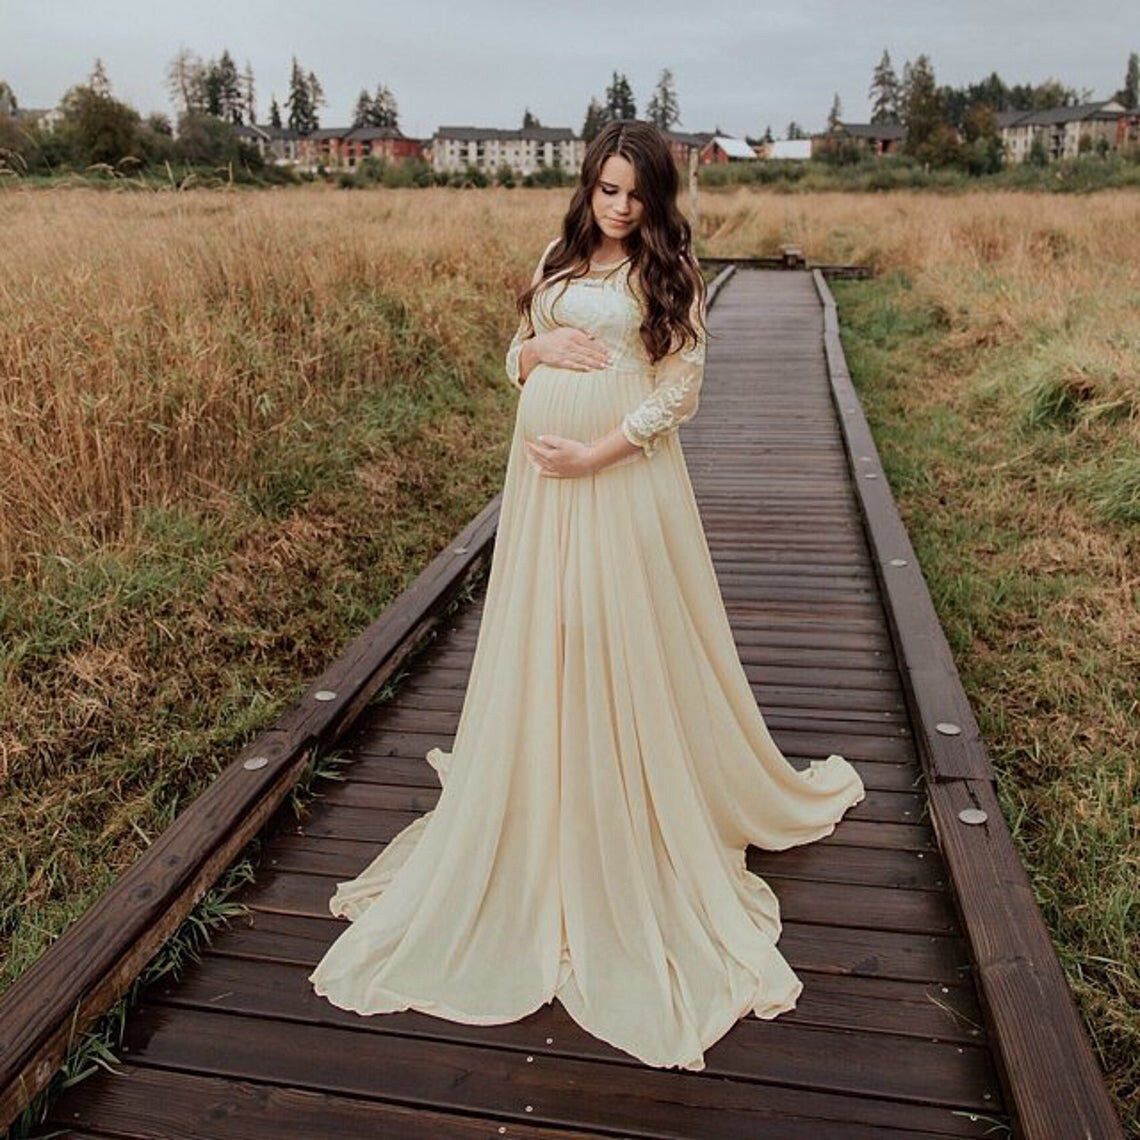 Flowy-Maxi-Dress- Hottest 25 Maternity Photoshoot Outfit Ideas